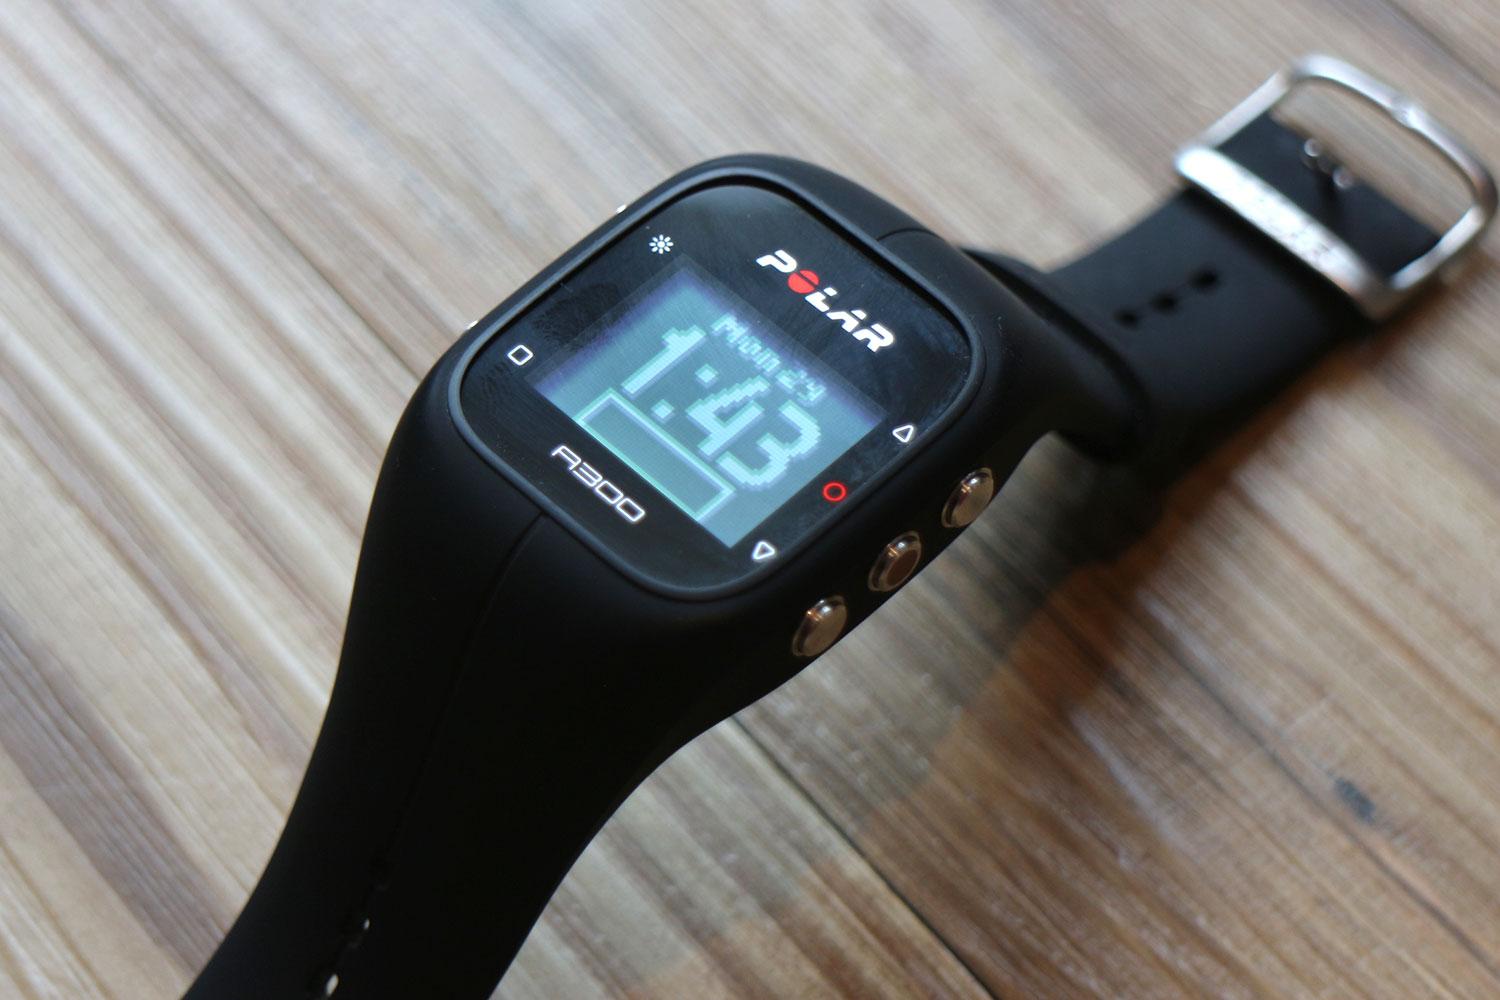 Polar A300 review: Function Over | Trends